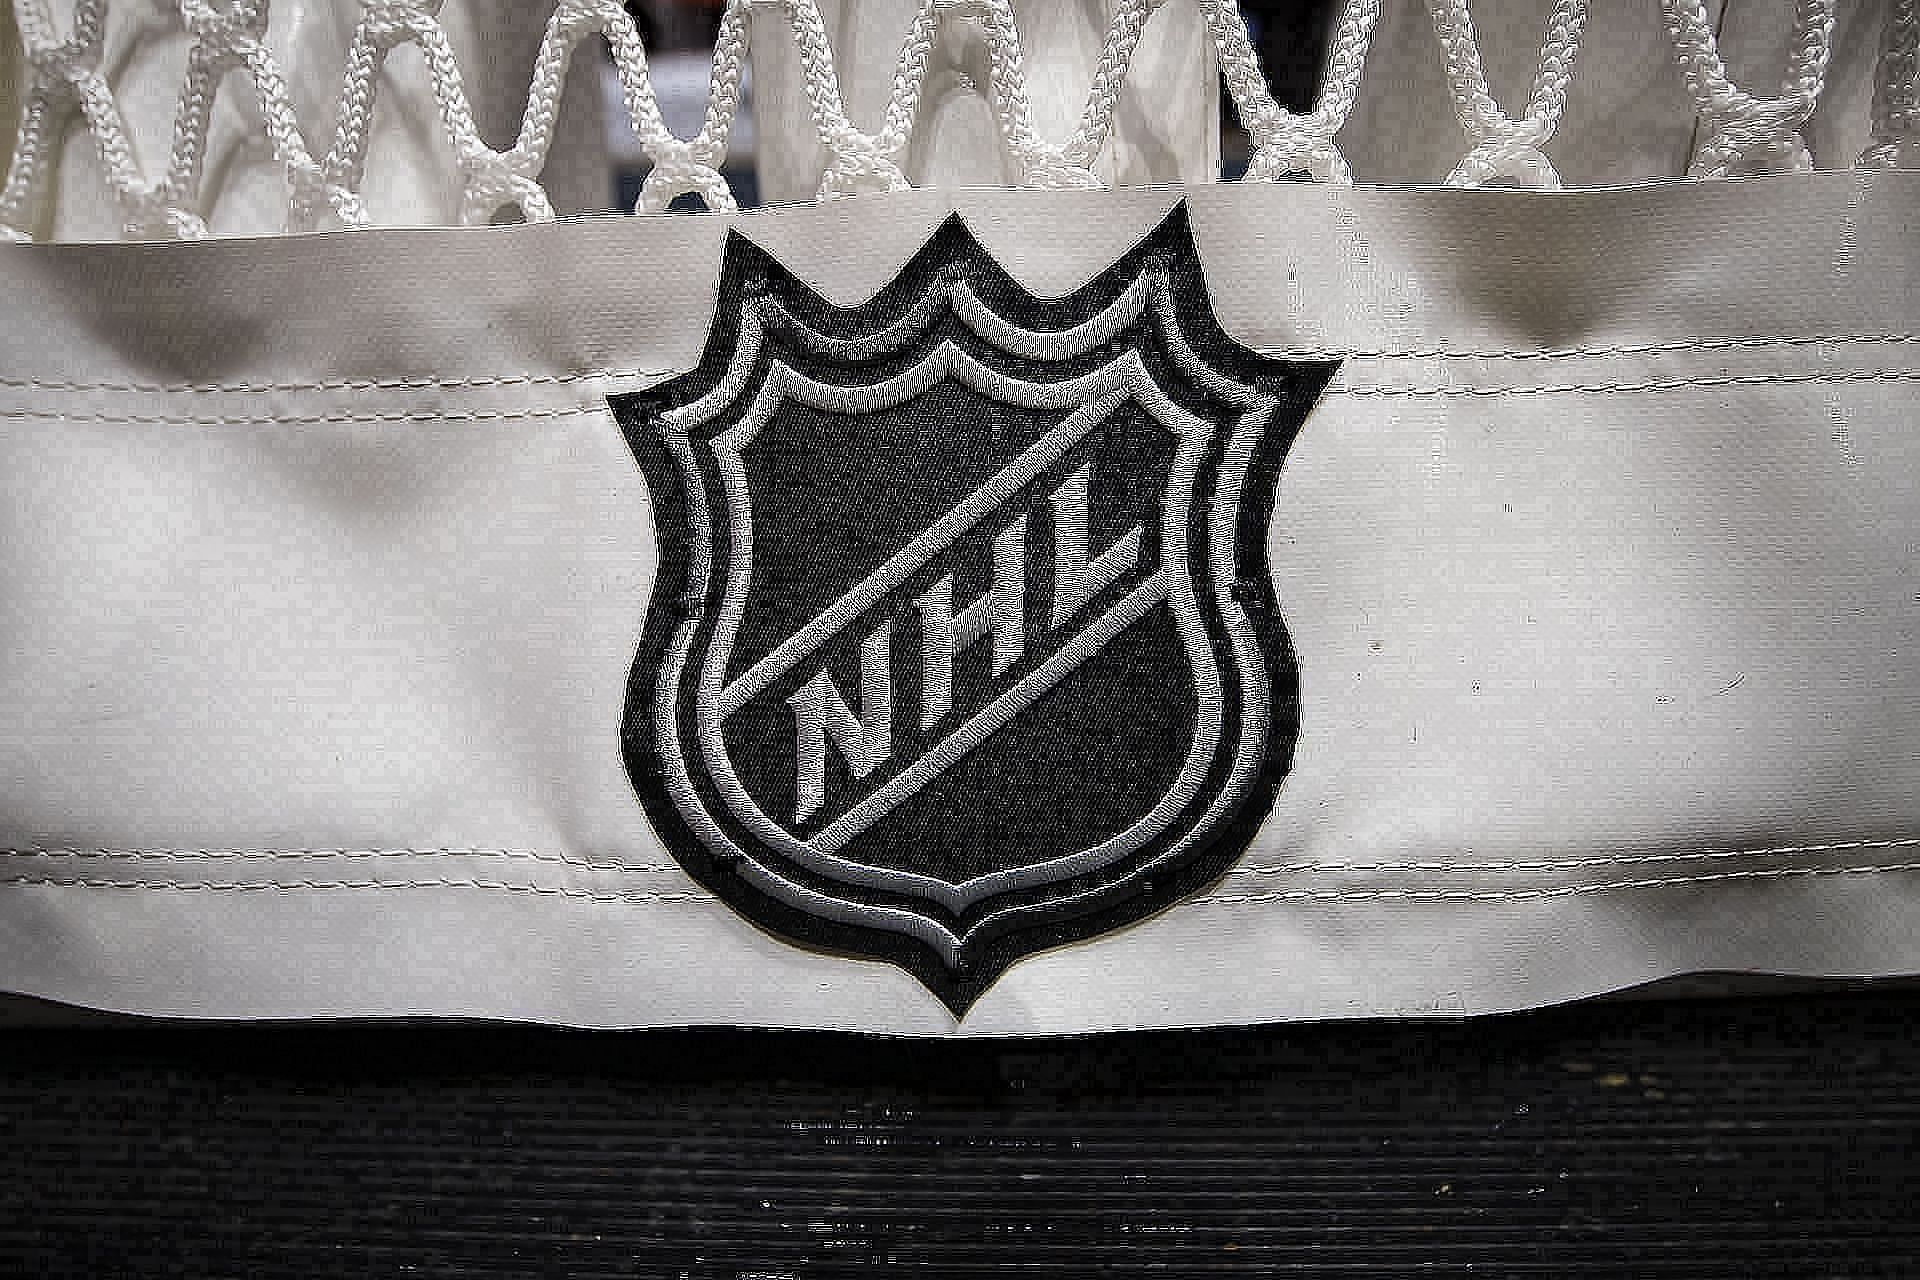 NHL considers rule changes after GMs meeting